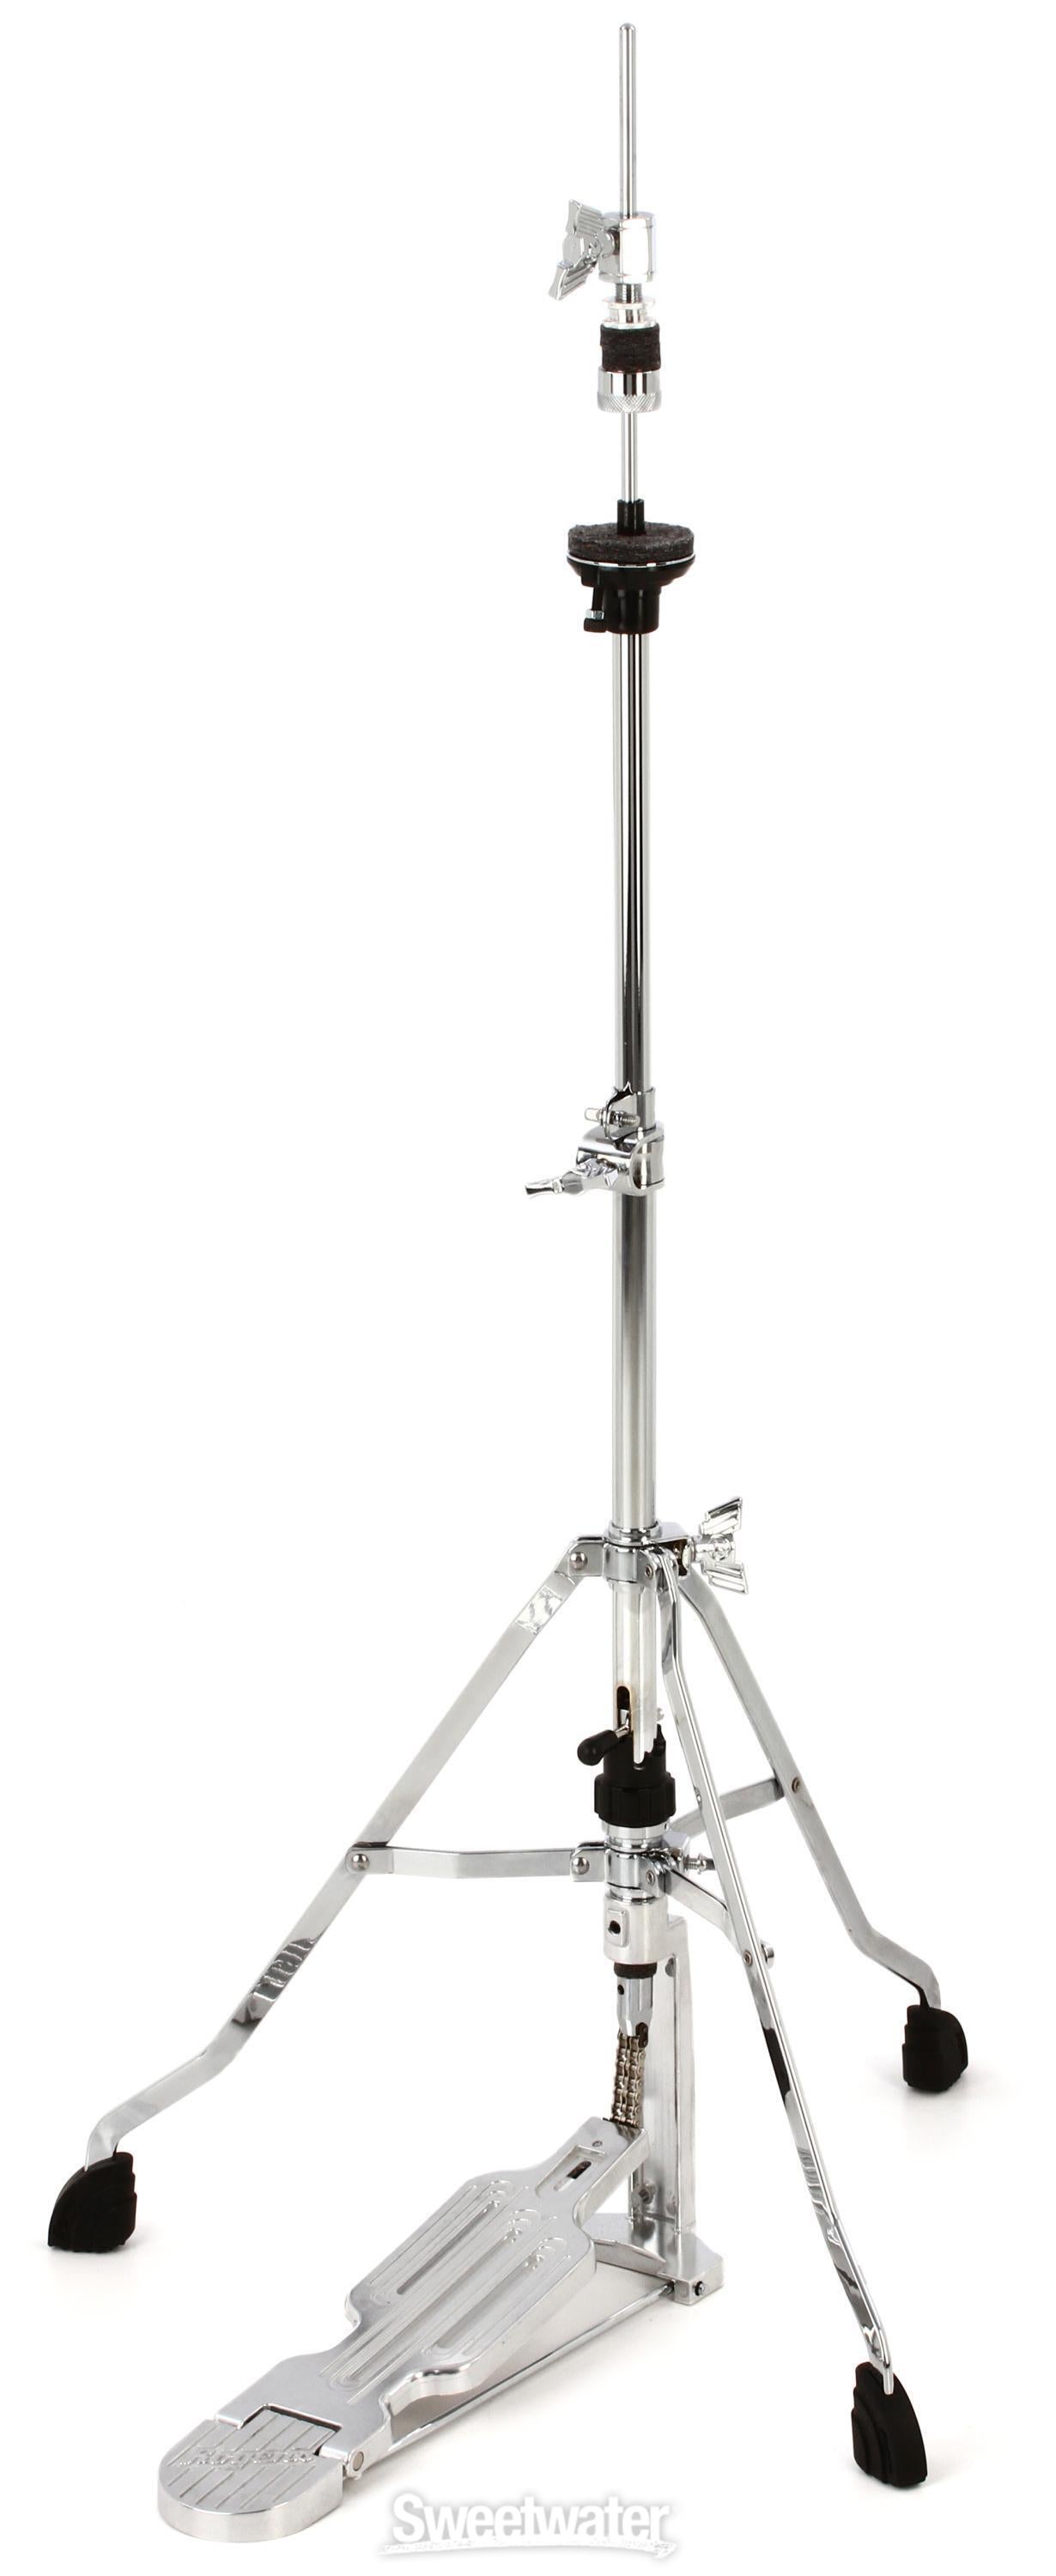 Rogers Drums RDH7 Dyno-Matic Hi-hat Stand - Single Braced | Sweetwater